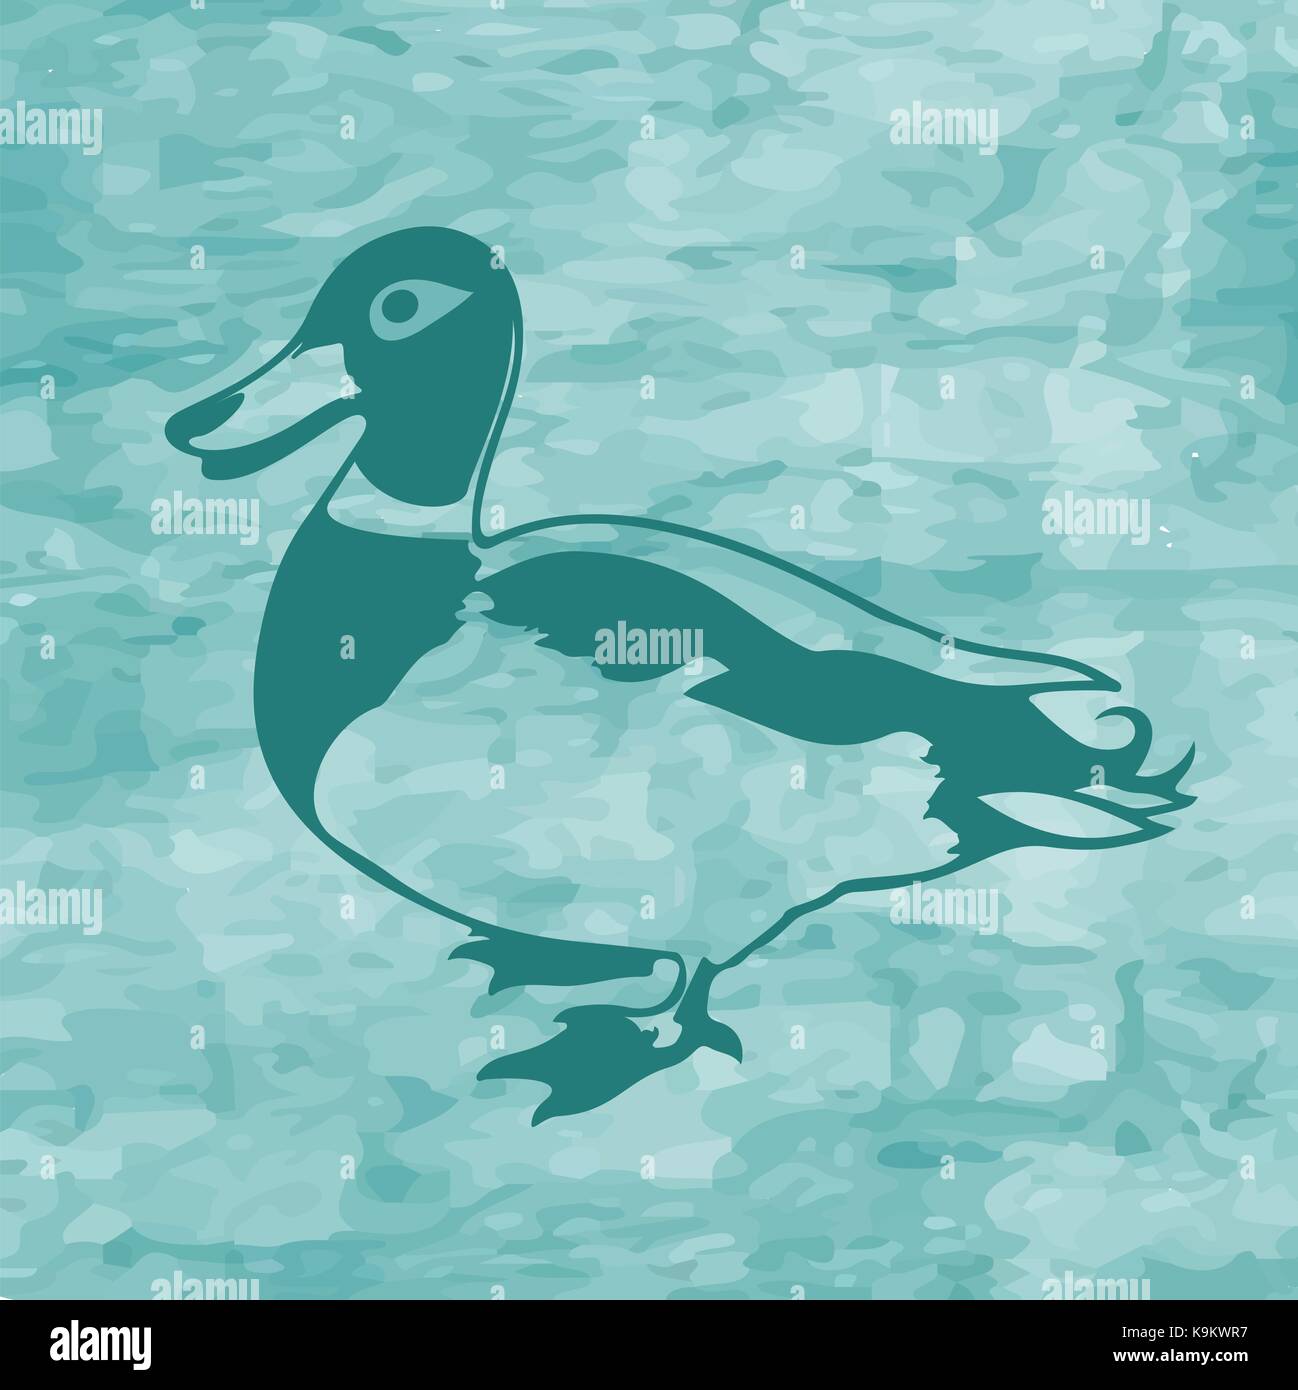 Funny Duck Wallpaper wallpaper by MBART  Download on ZEDGE  b8d9